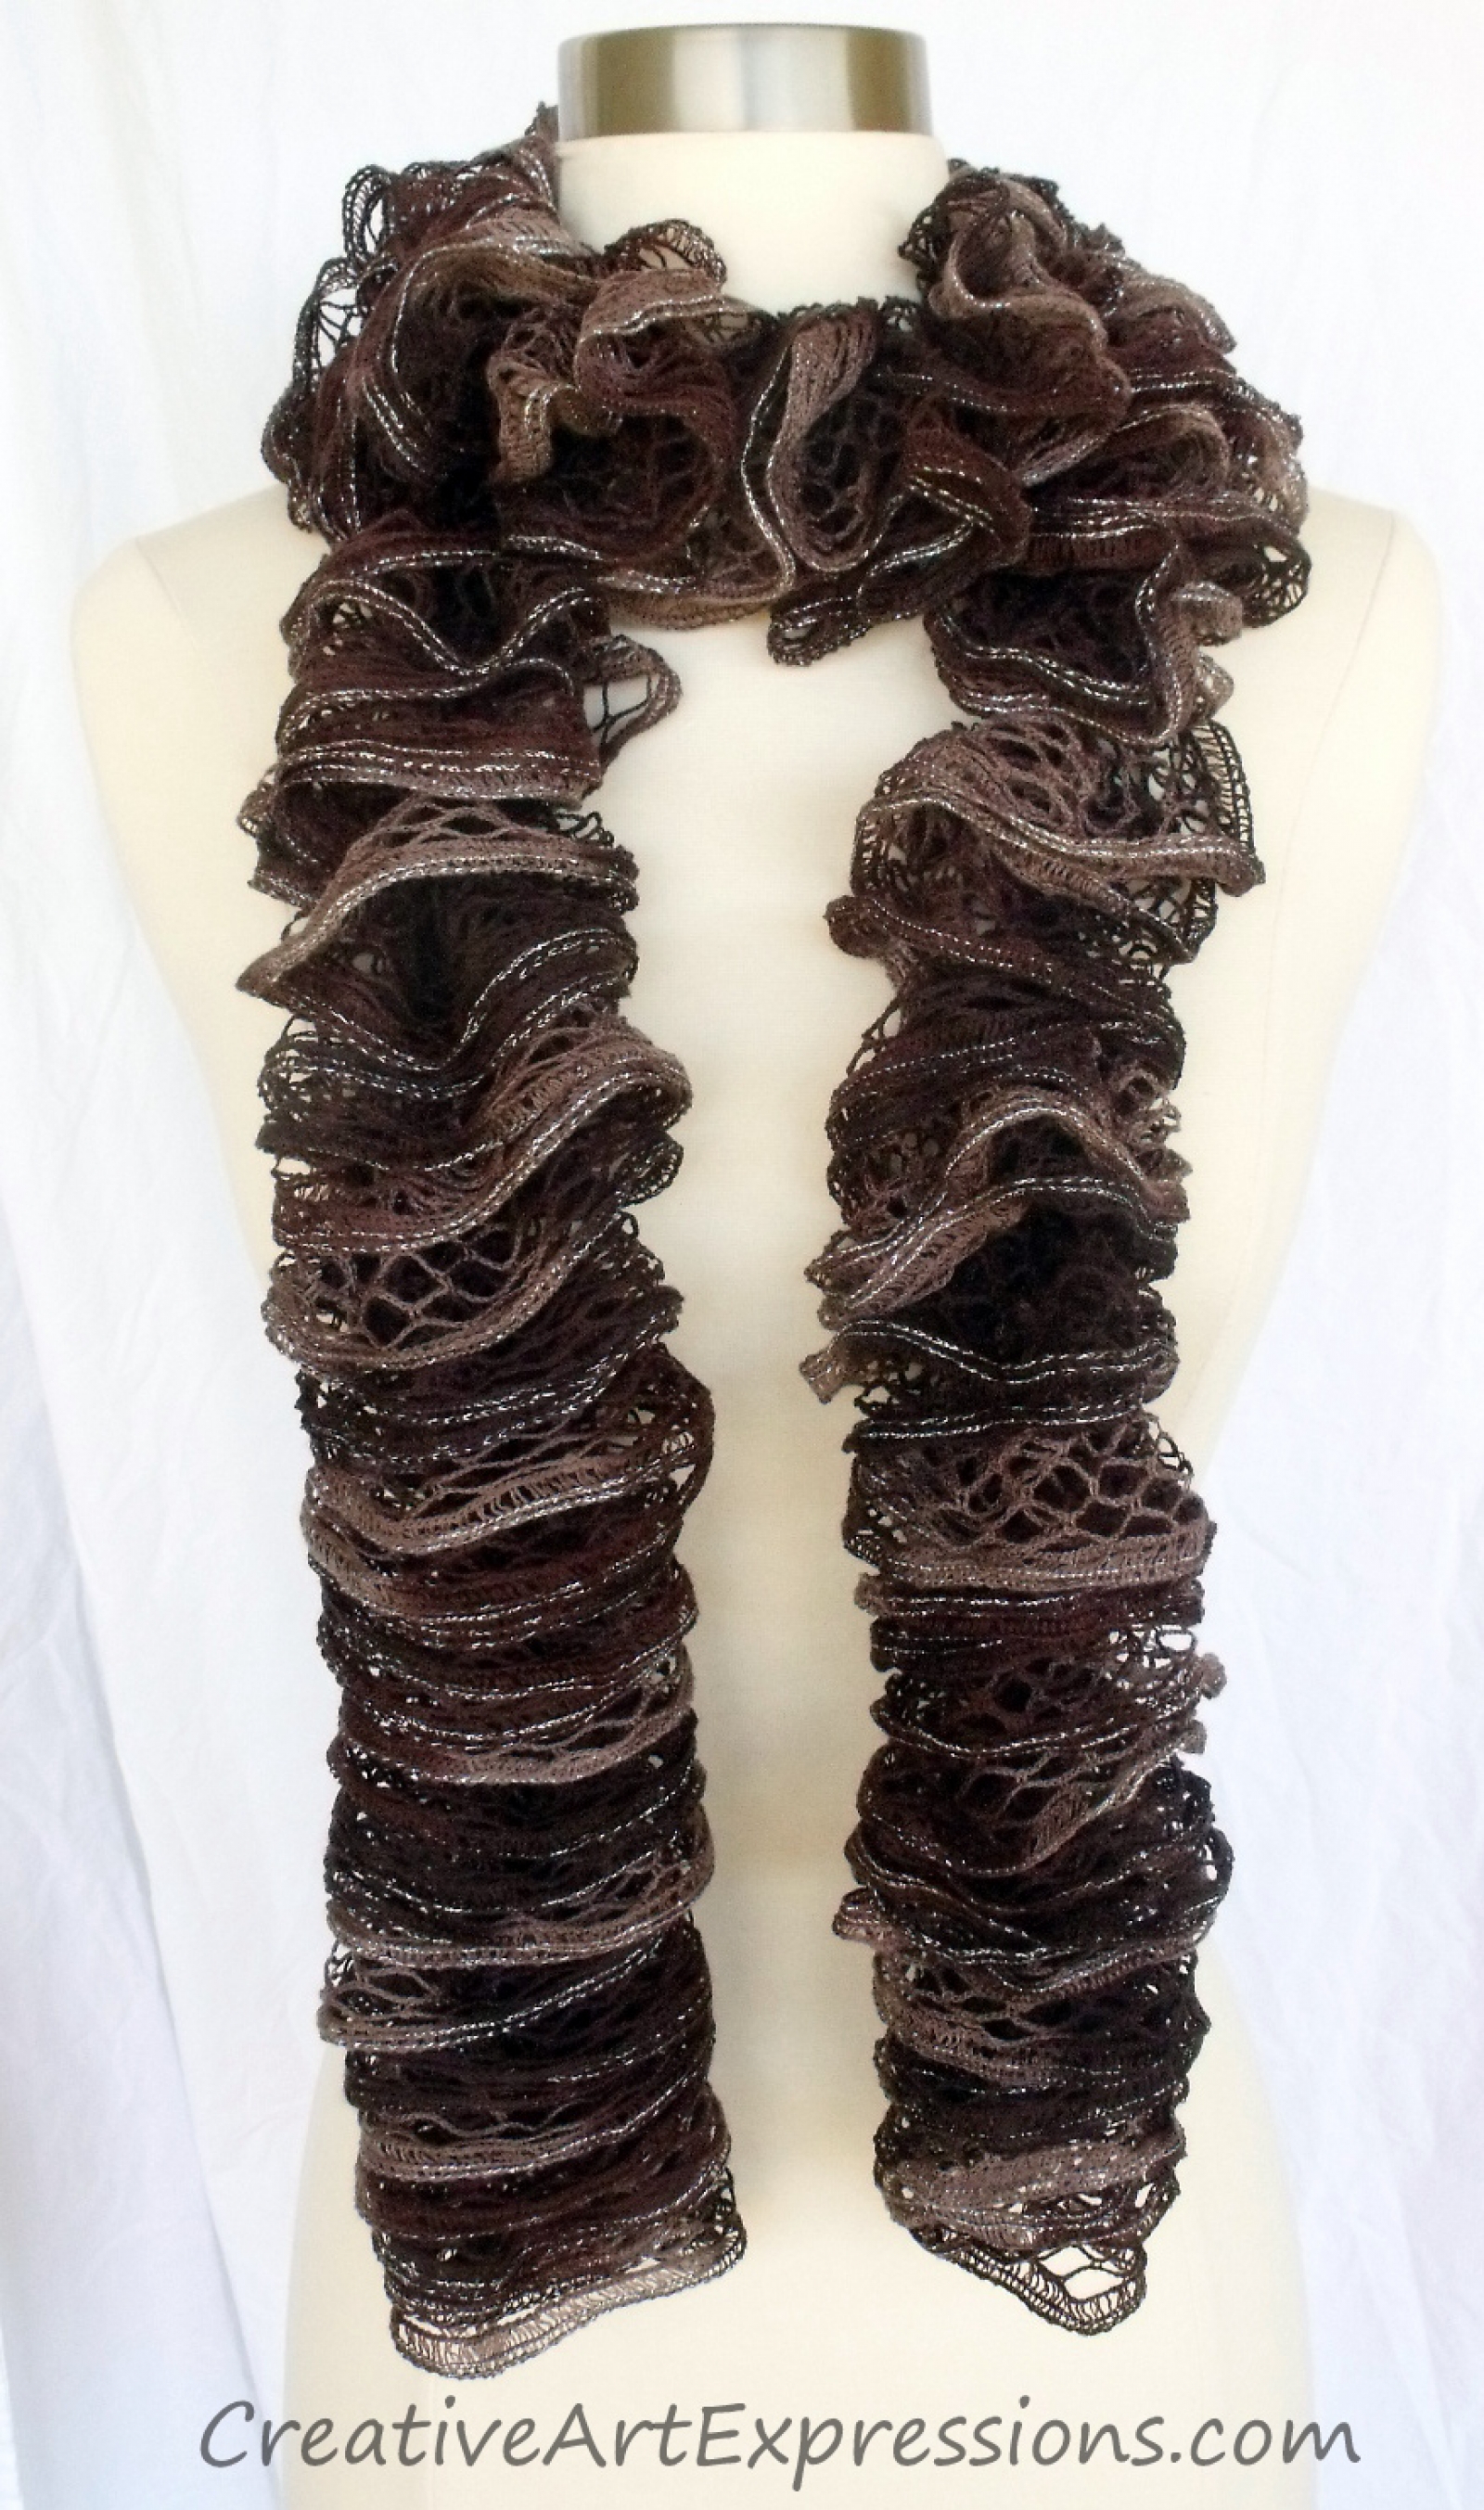 Creative Art Expressions Hand Knitted Shades of Brown Ruffle Scarf ...